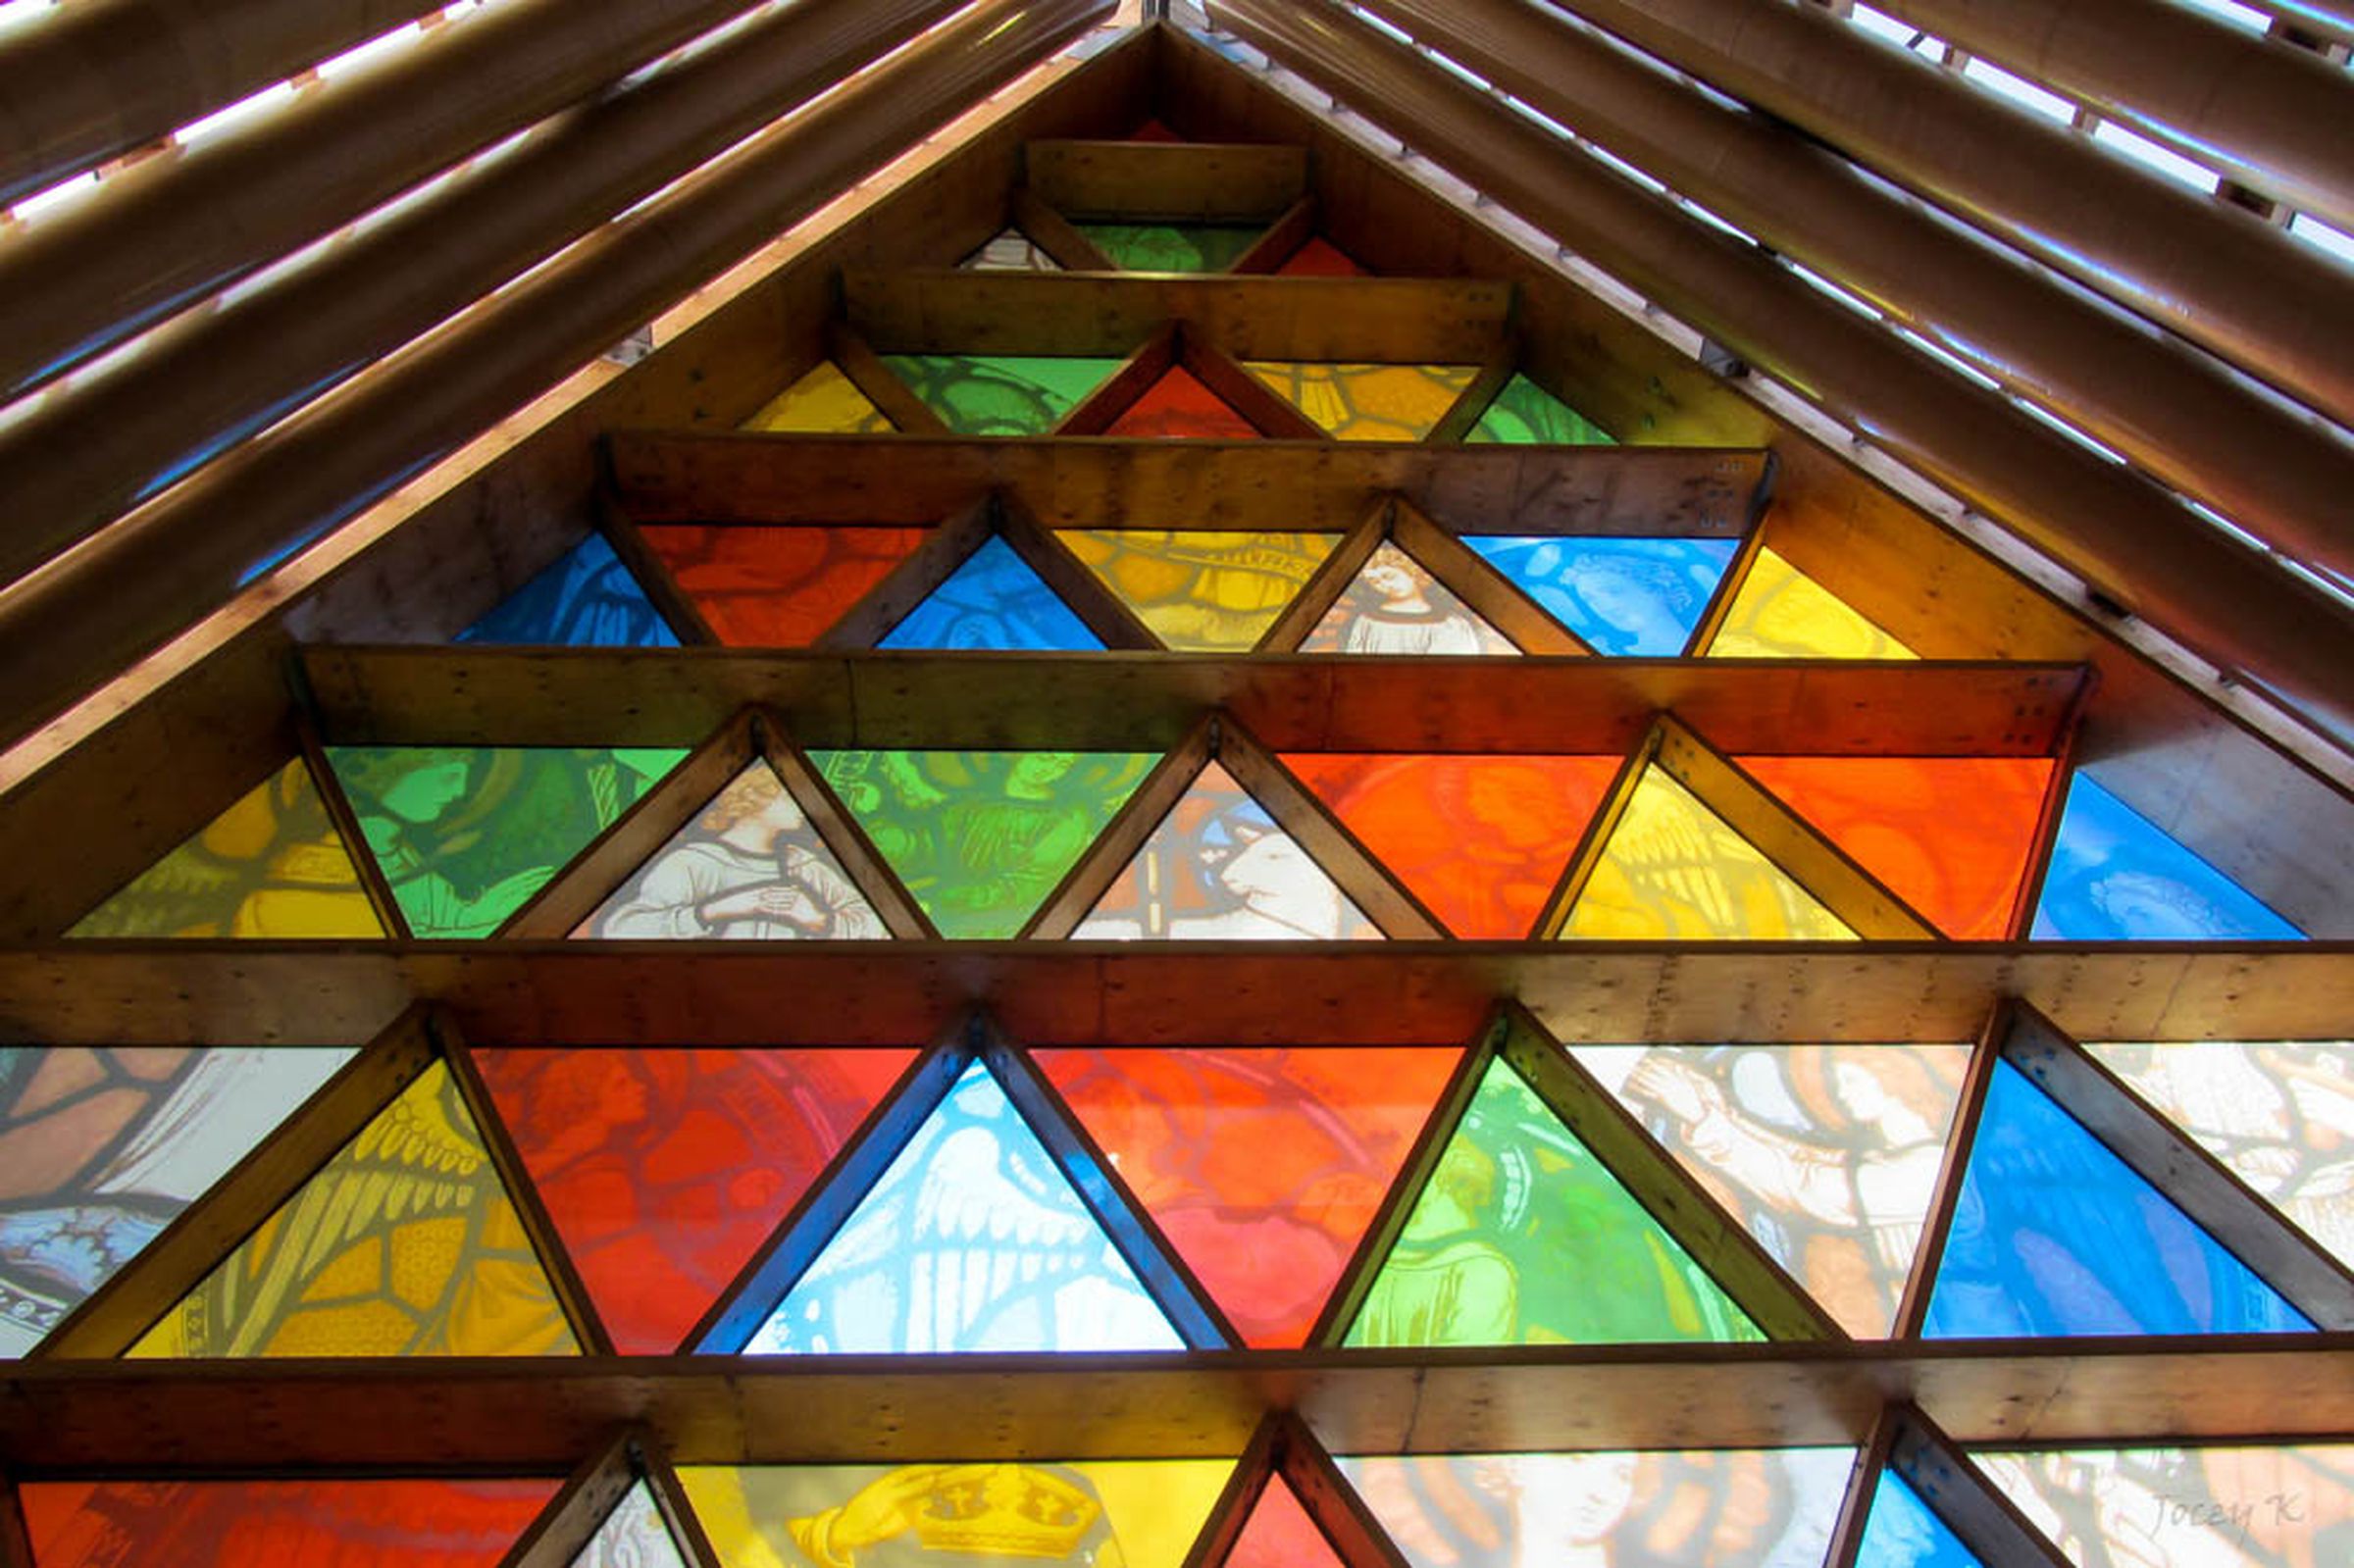 Christchurch 'Cardboard' cathedral in photos